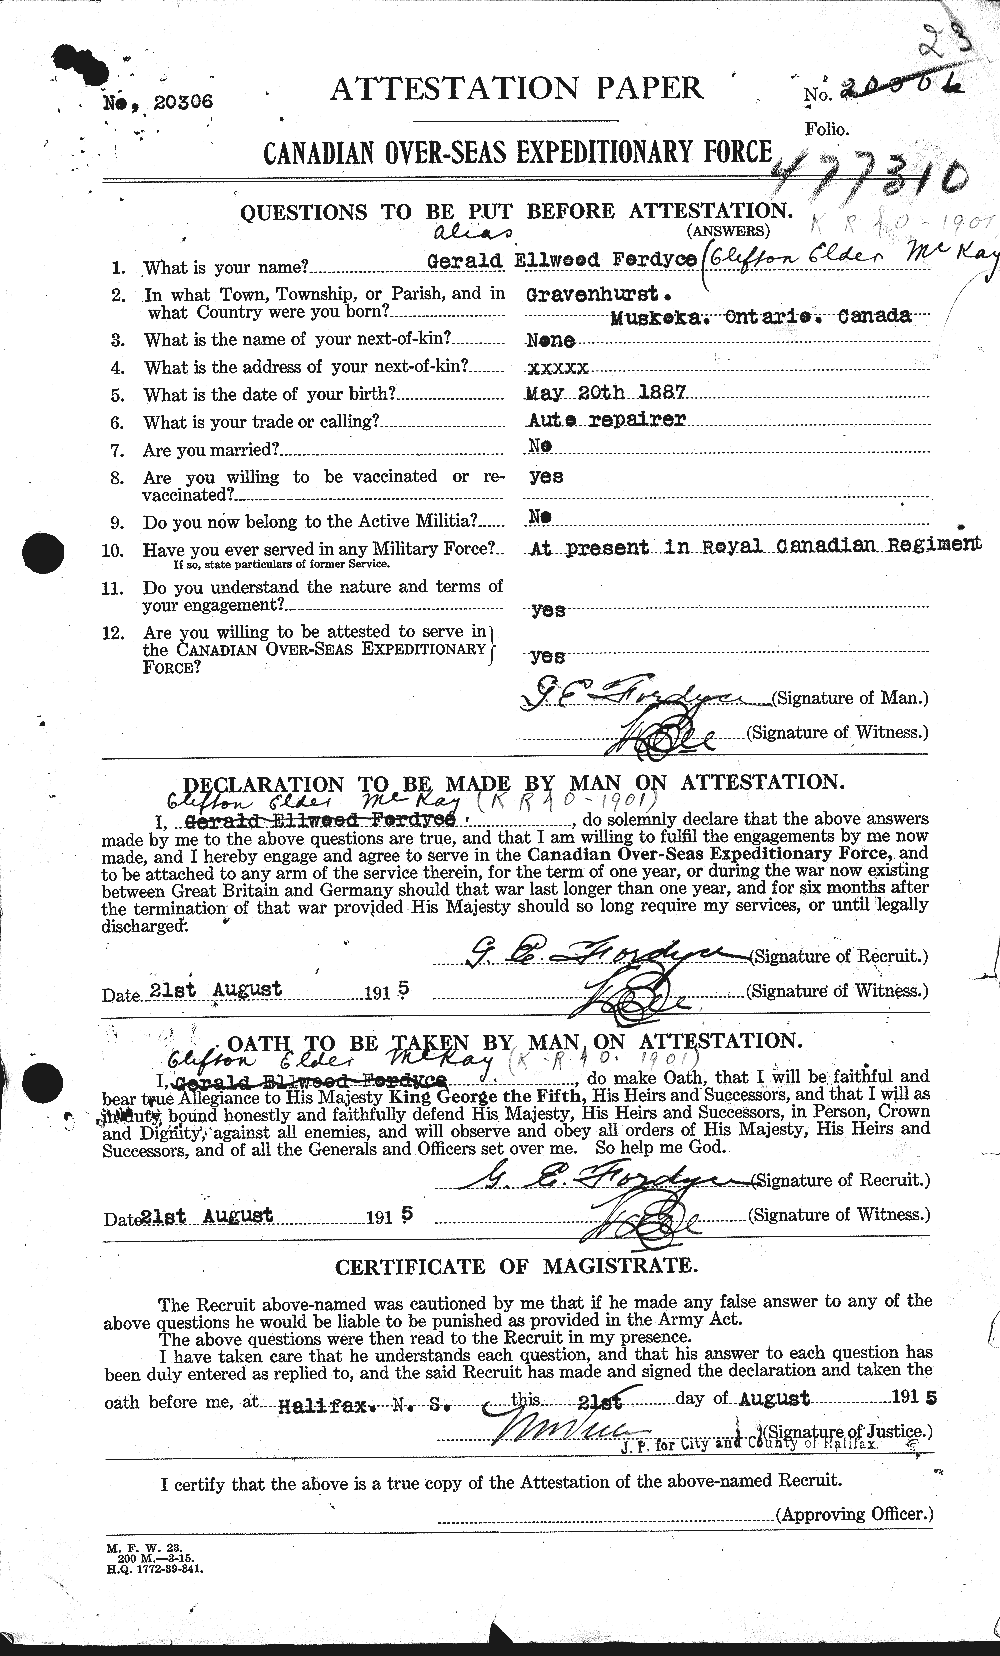 Personnel Records of the First World War - CEF 531097a